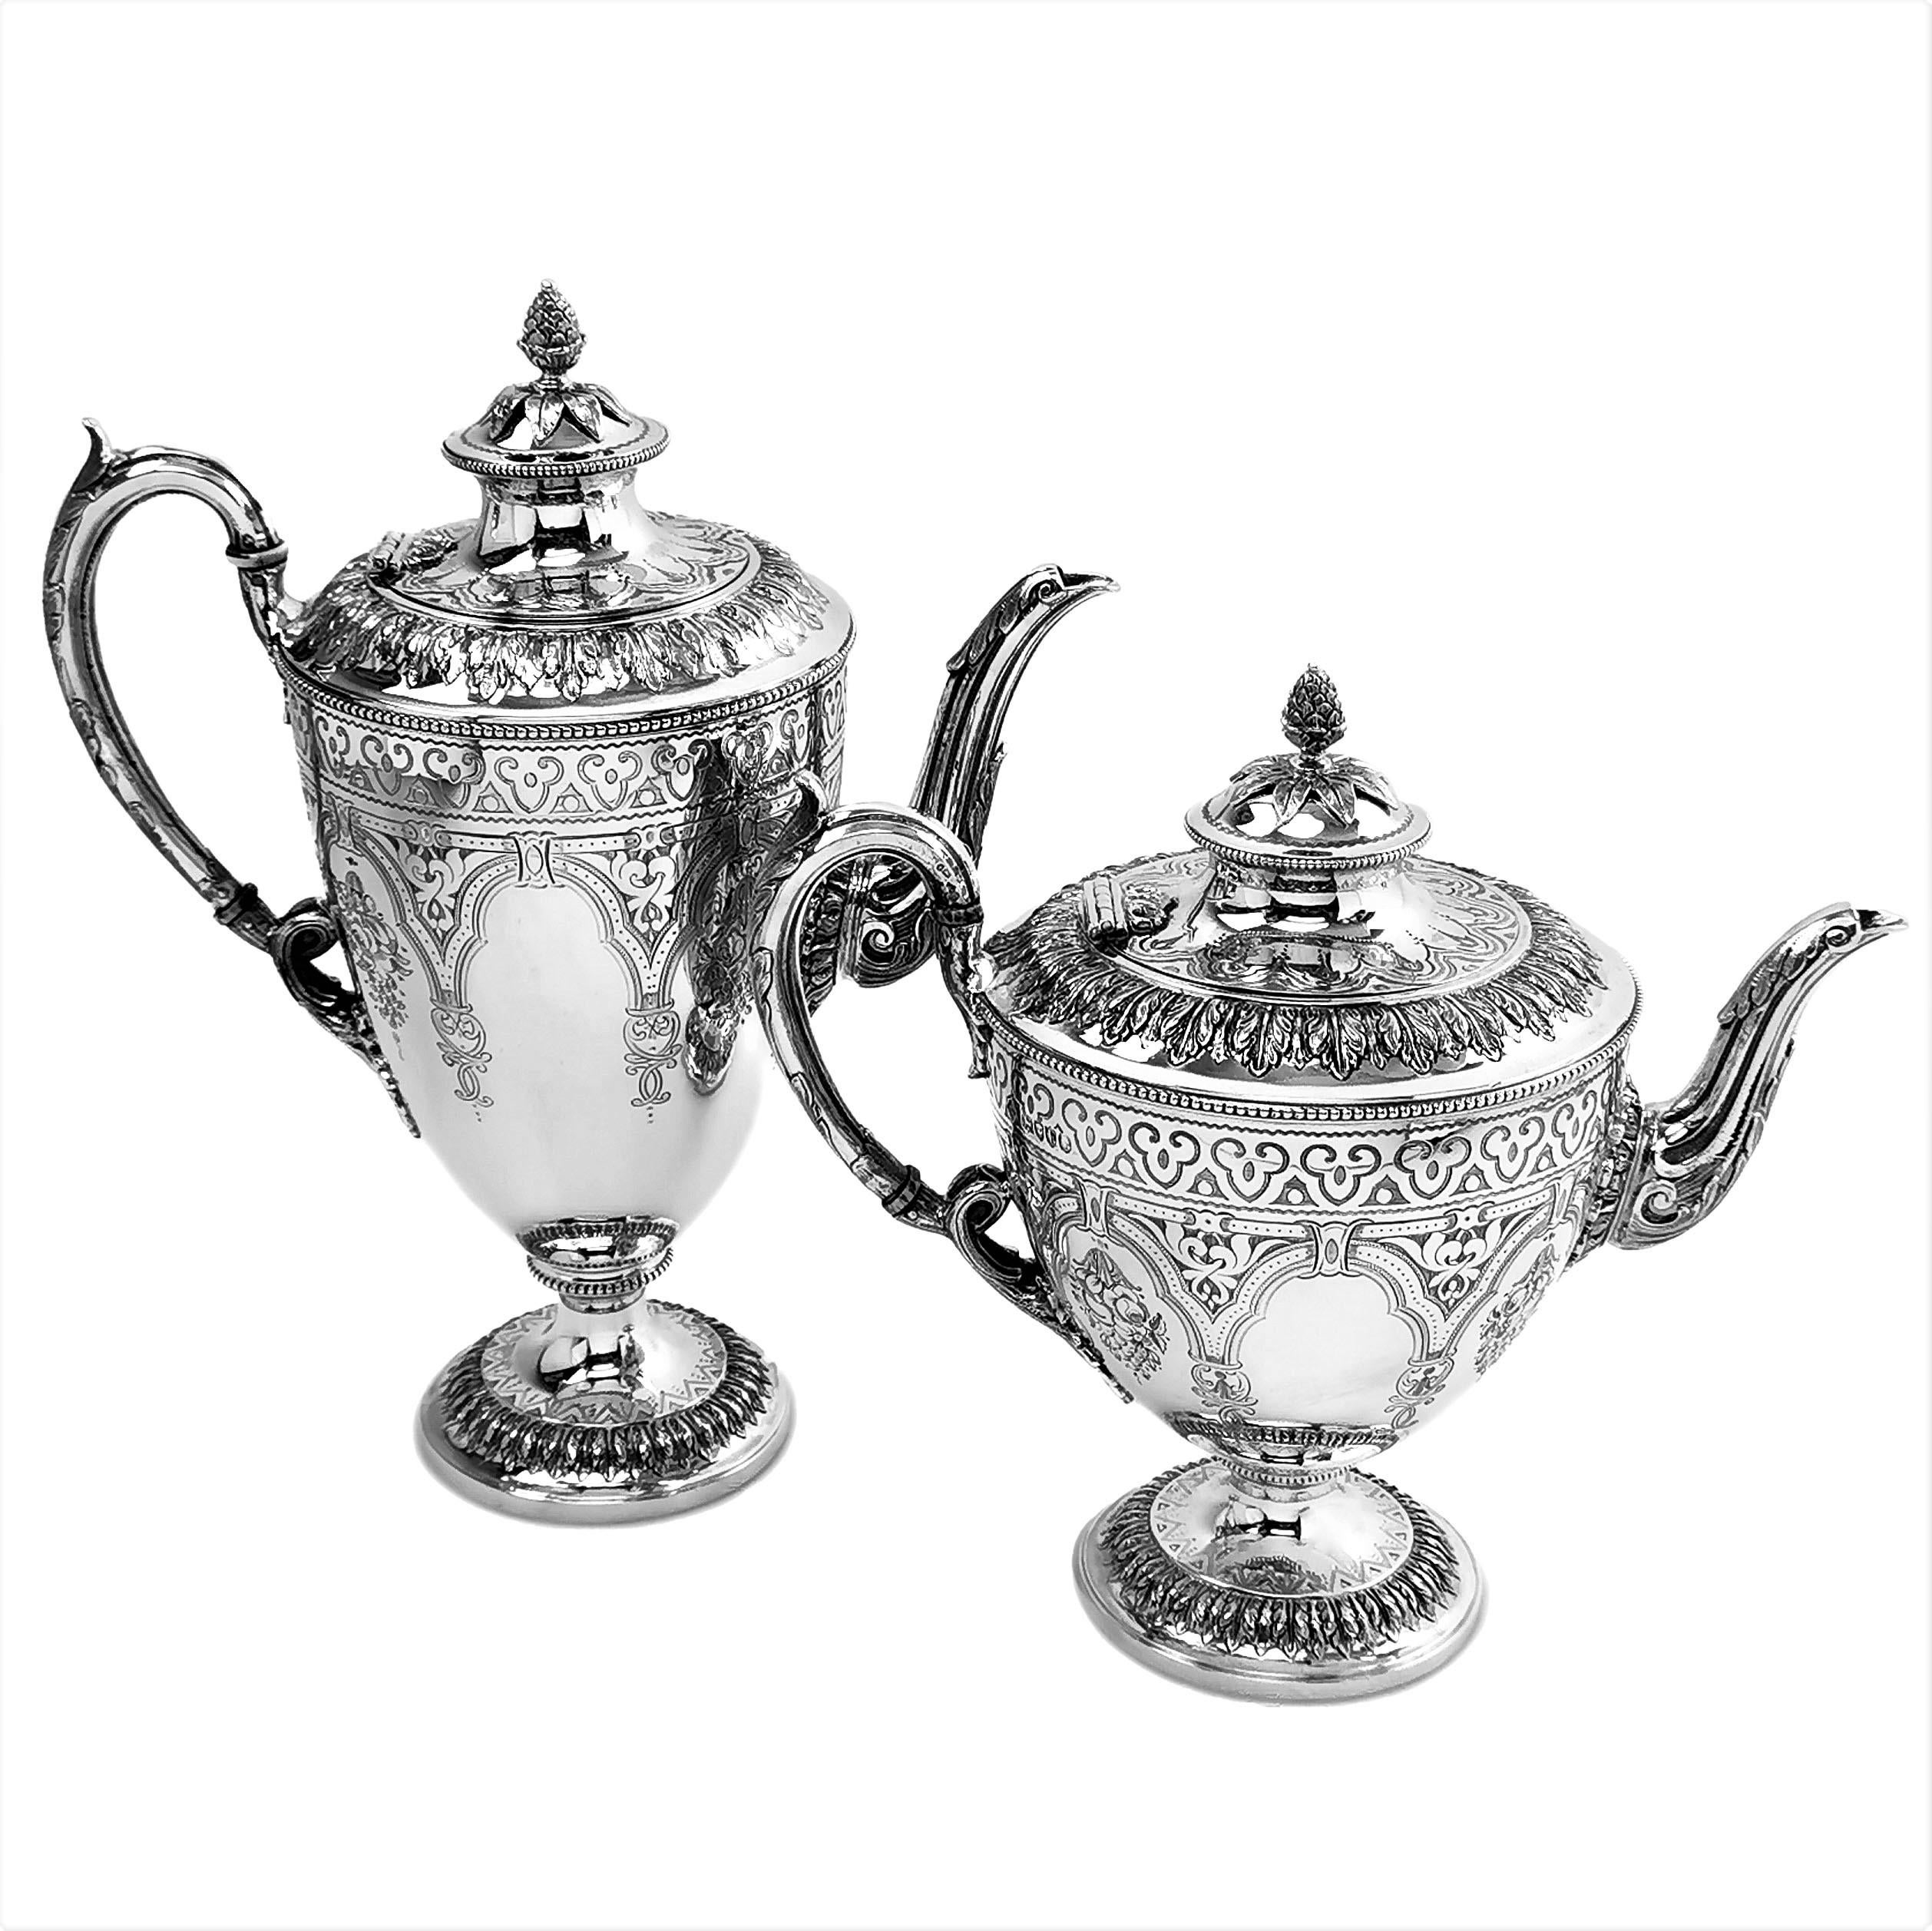 Antique Victorian 5 Piece Silver Tea and Coffee Set with Kettle, 1881 / 82 For Sale 3